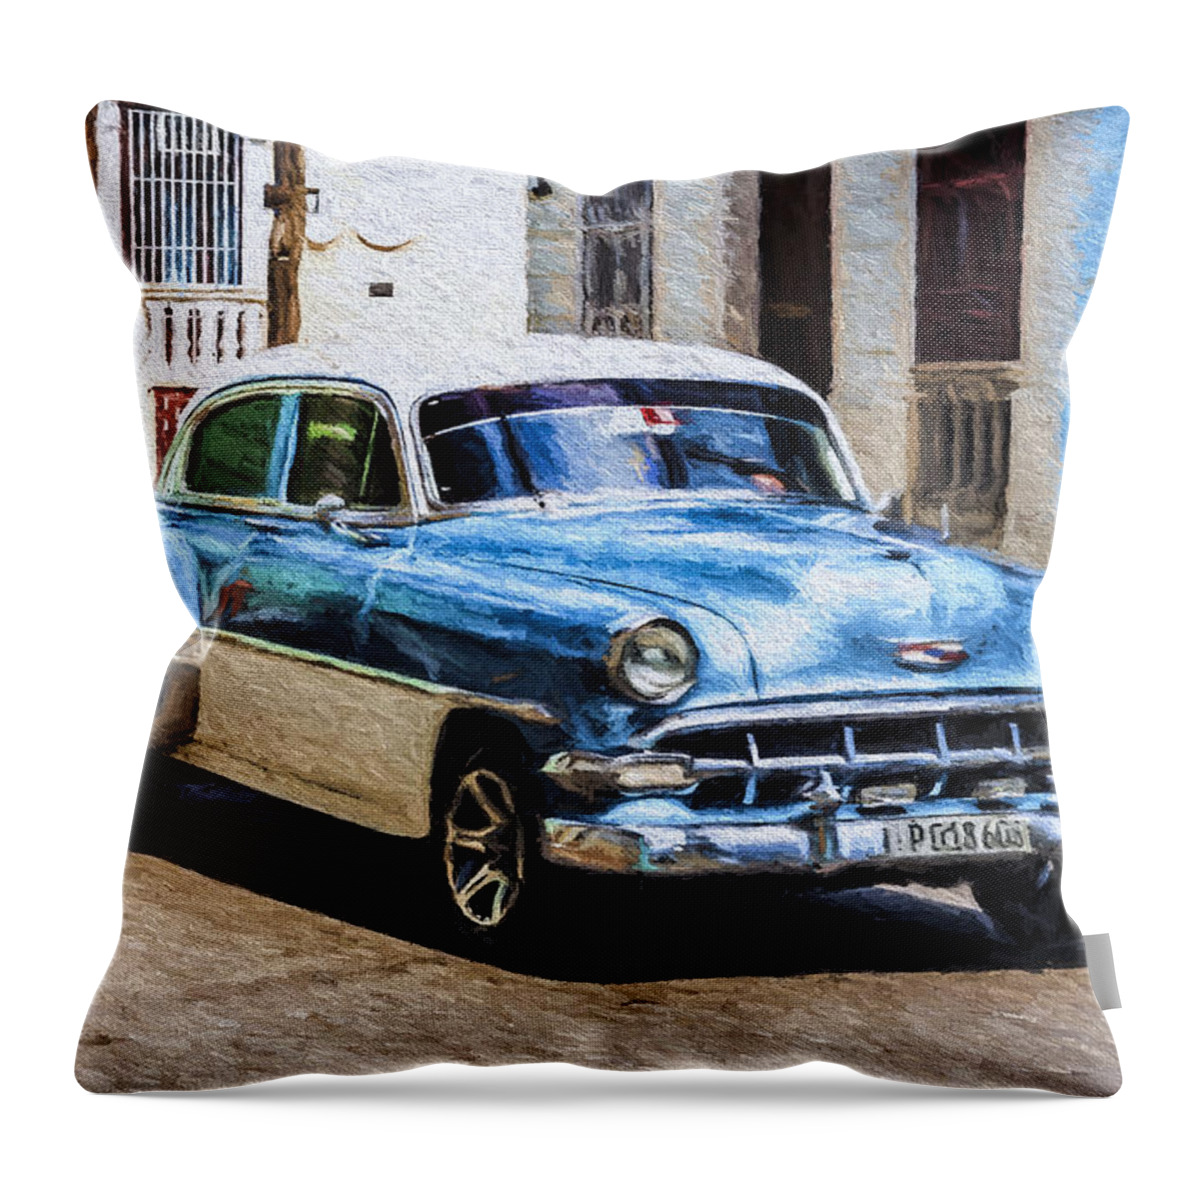 54 Chevy Throw Pillow featuring the photograph 1954 Chevy Bel Air by Lou Novick